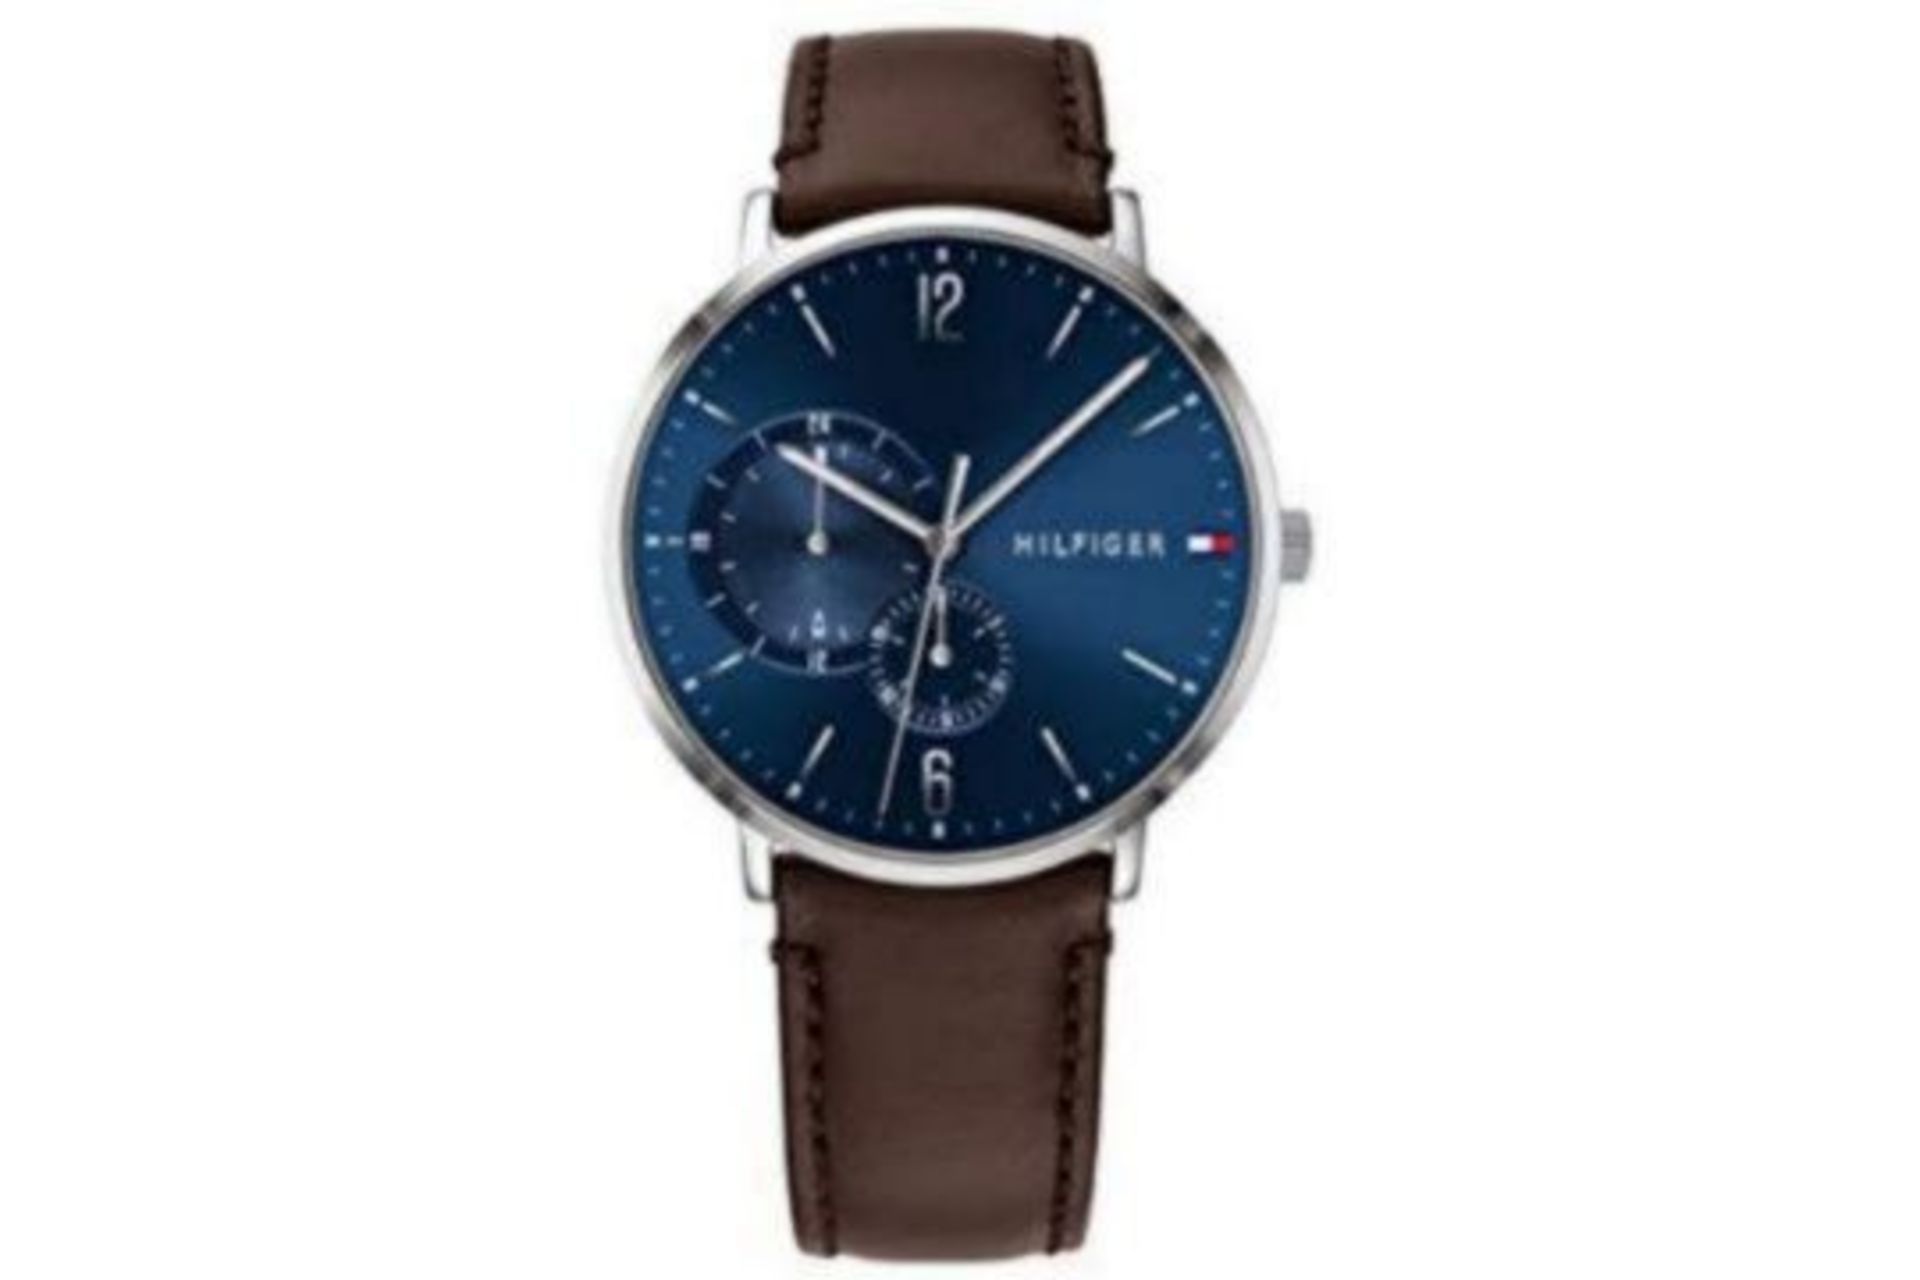 BRAND NEW RETAIL BOXED TOMMY HILFIGER BROOKLYN MULTI FUNCTION MENS ANALOG BLUE CASUAL QUARTZ WATCH